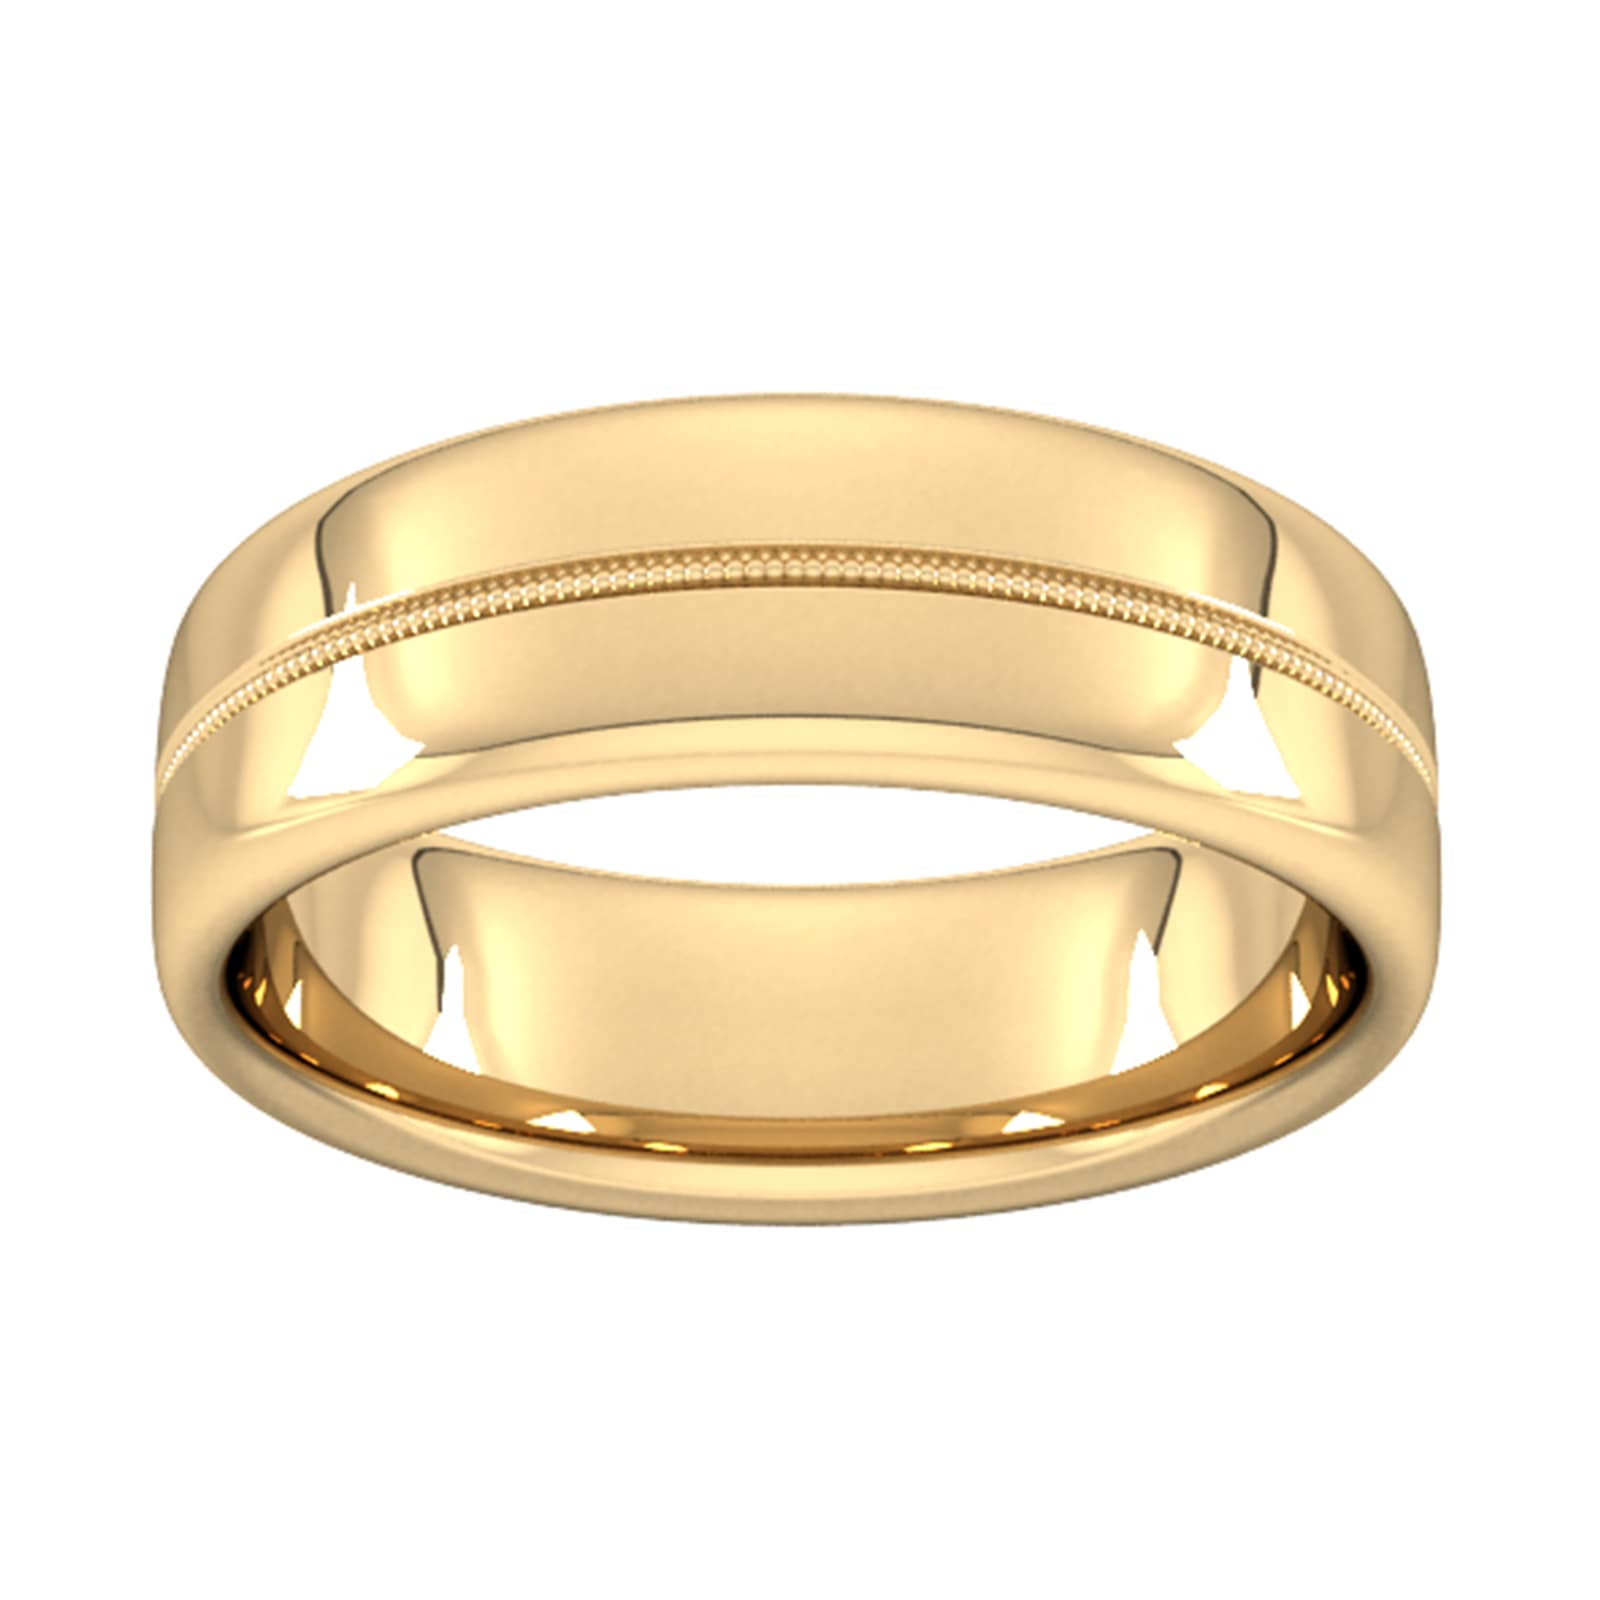 7mm D Shape Standard Milgrain Centre Wedding Ring In 18 Carat Yellow Gold - Ring Size T